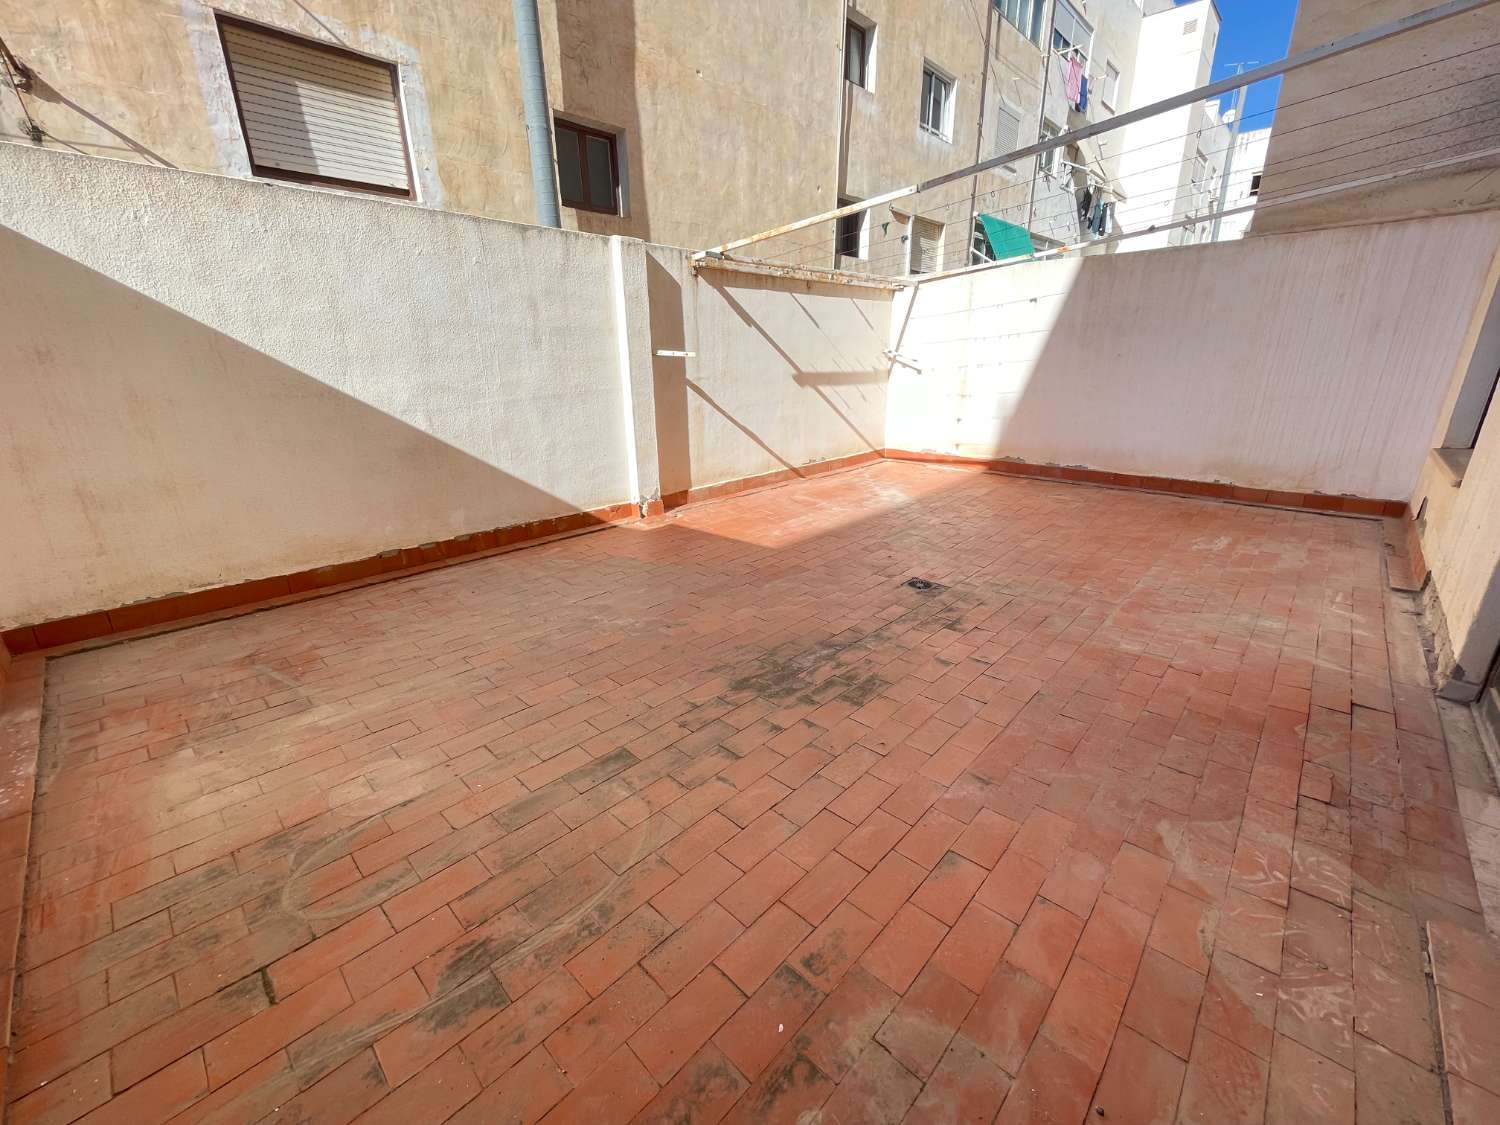 MAKE YOUR OFFER!! MUTXAMIEL APARTMENT 3 BEDROOMS TWO BATHROOMS WITH 40M2 BACKYARD TO REFORM!!